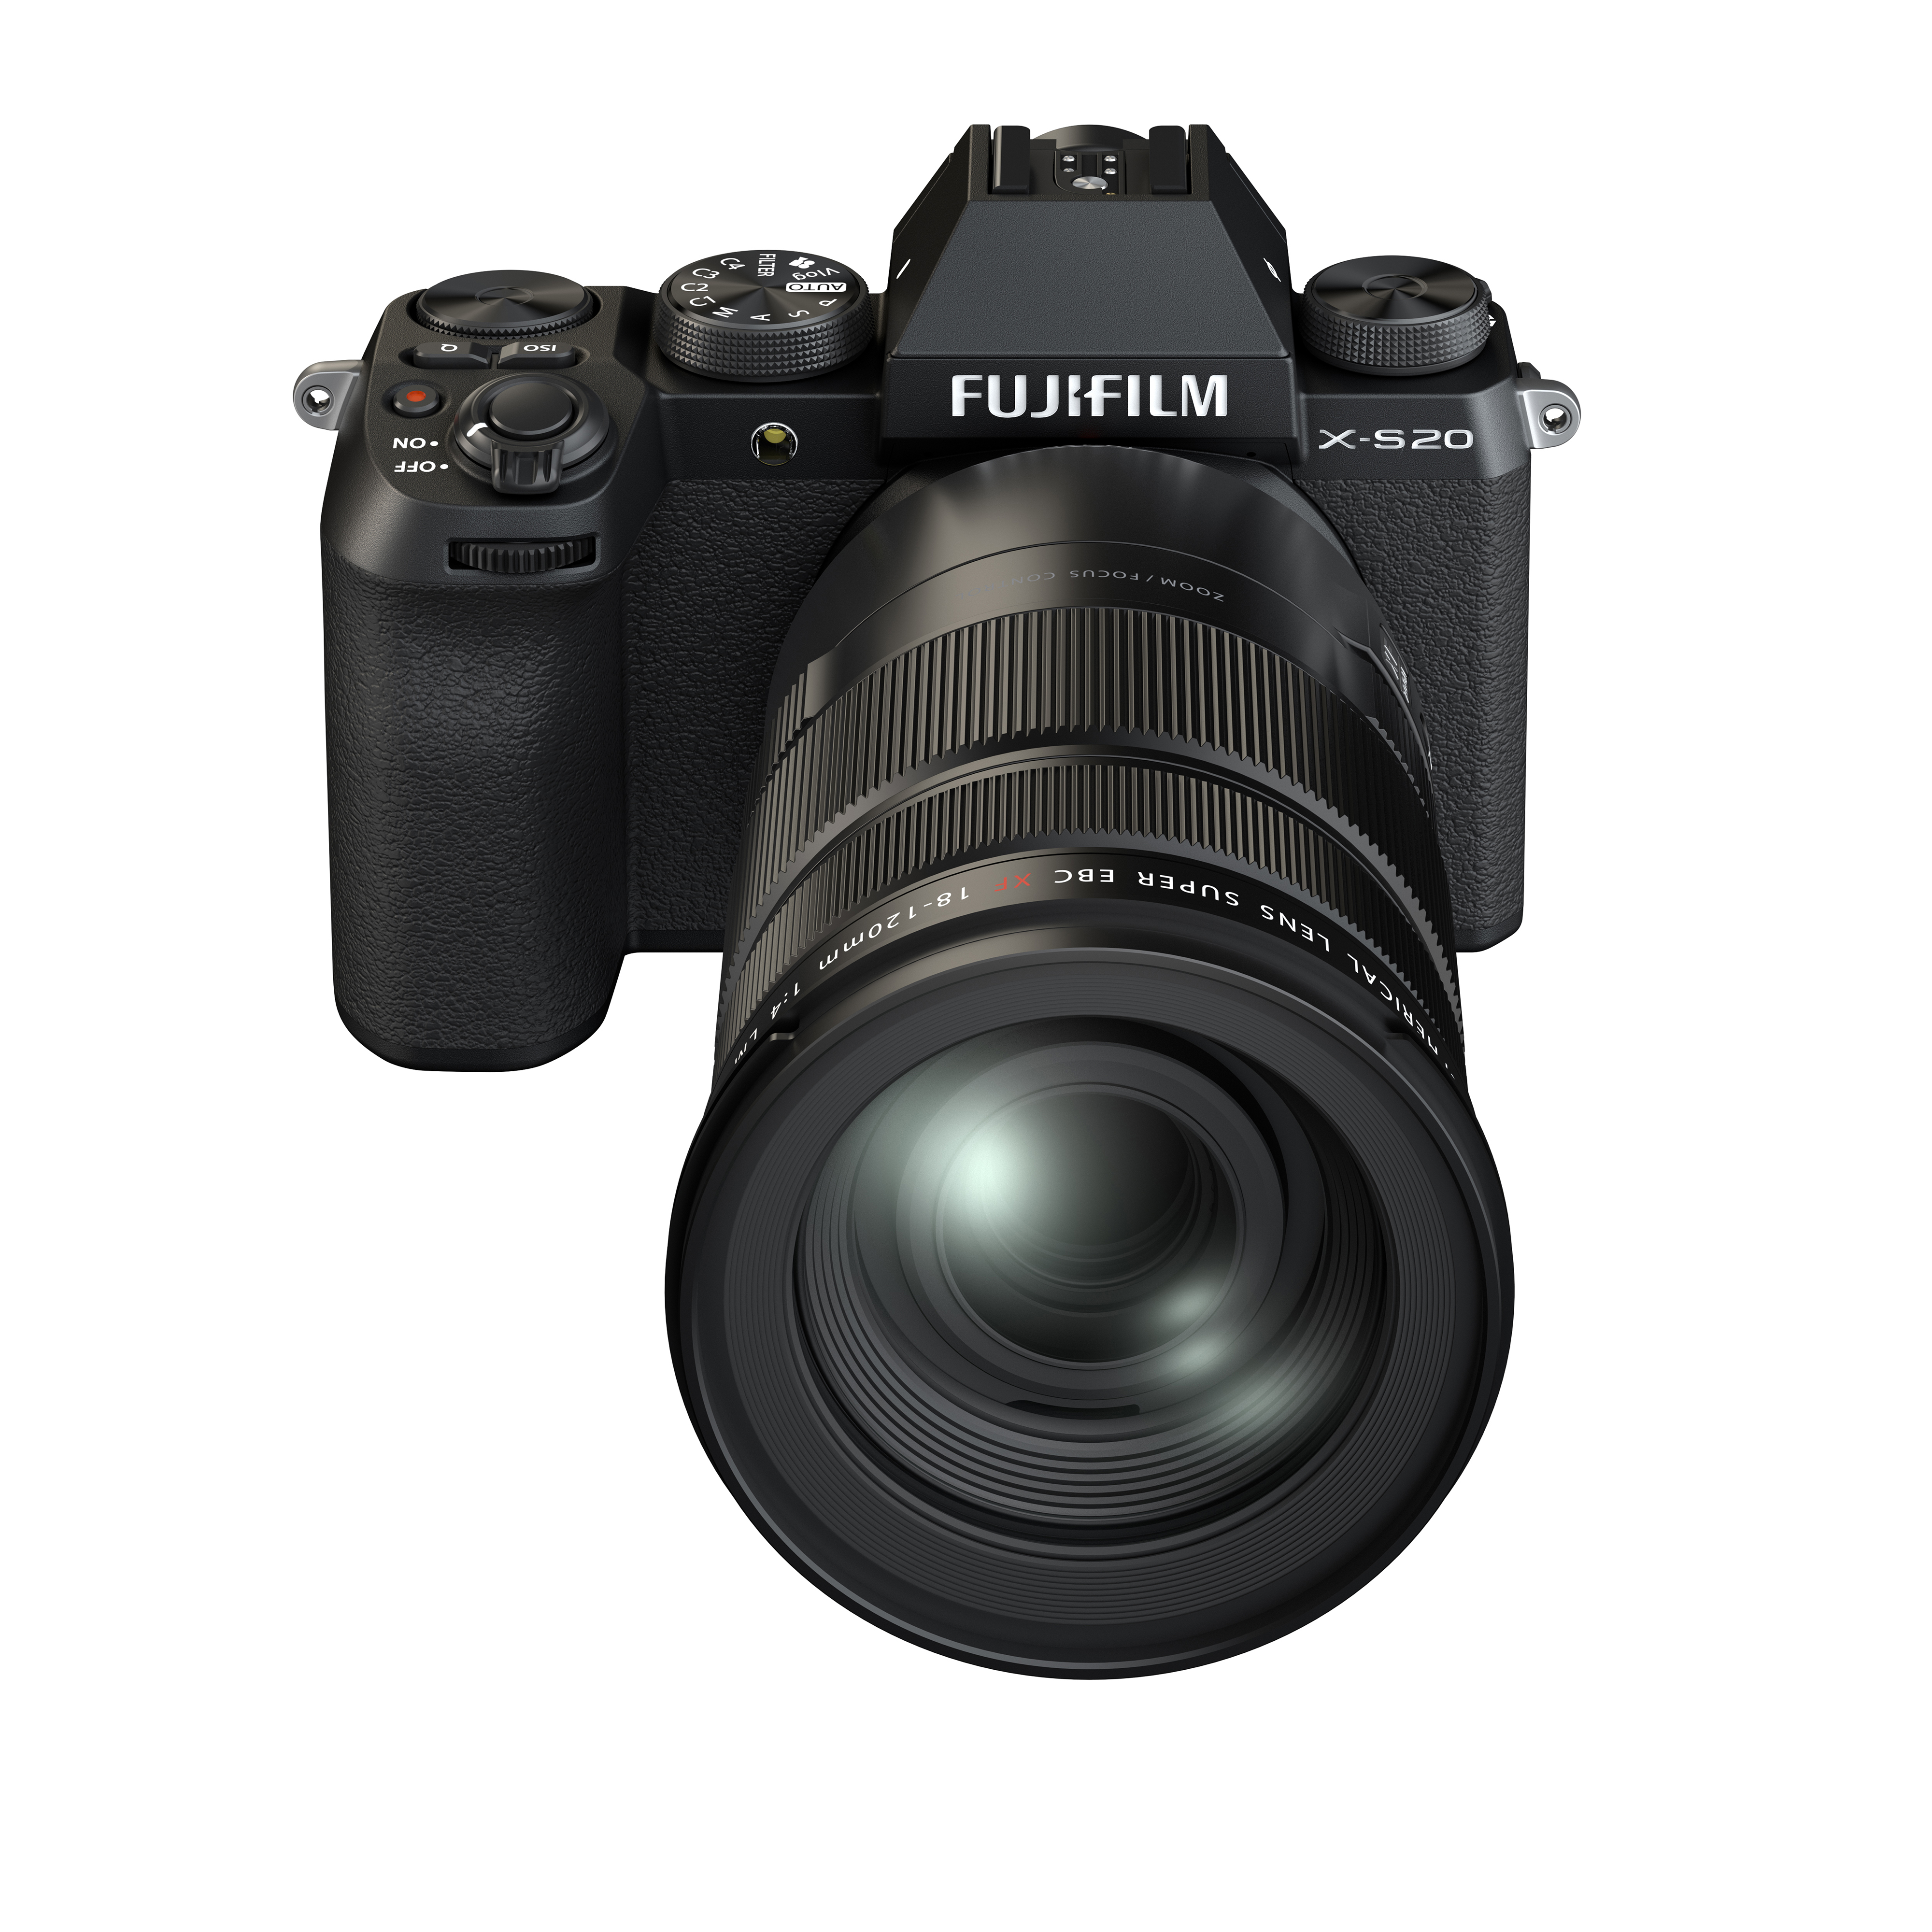 Fujifilm X-S20 Mirrorless Digital Camera with 15-45mm Lens Buy and Ship  Today